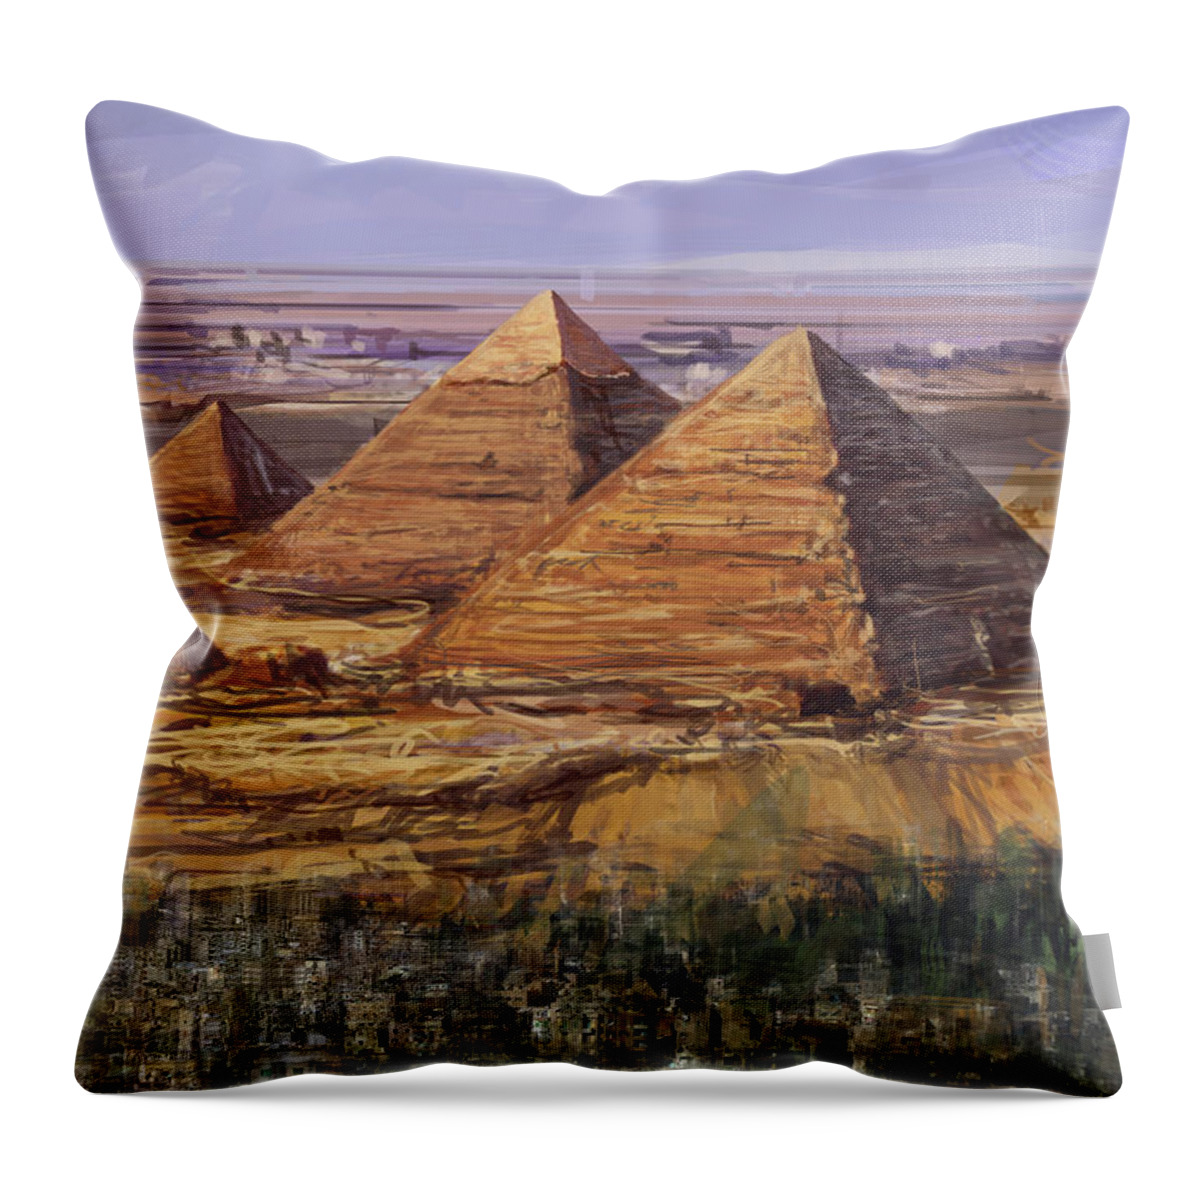 Egypt Throw Pillow featuring the digital art Giza pyramids painting by Andrea Gatti